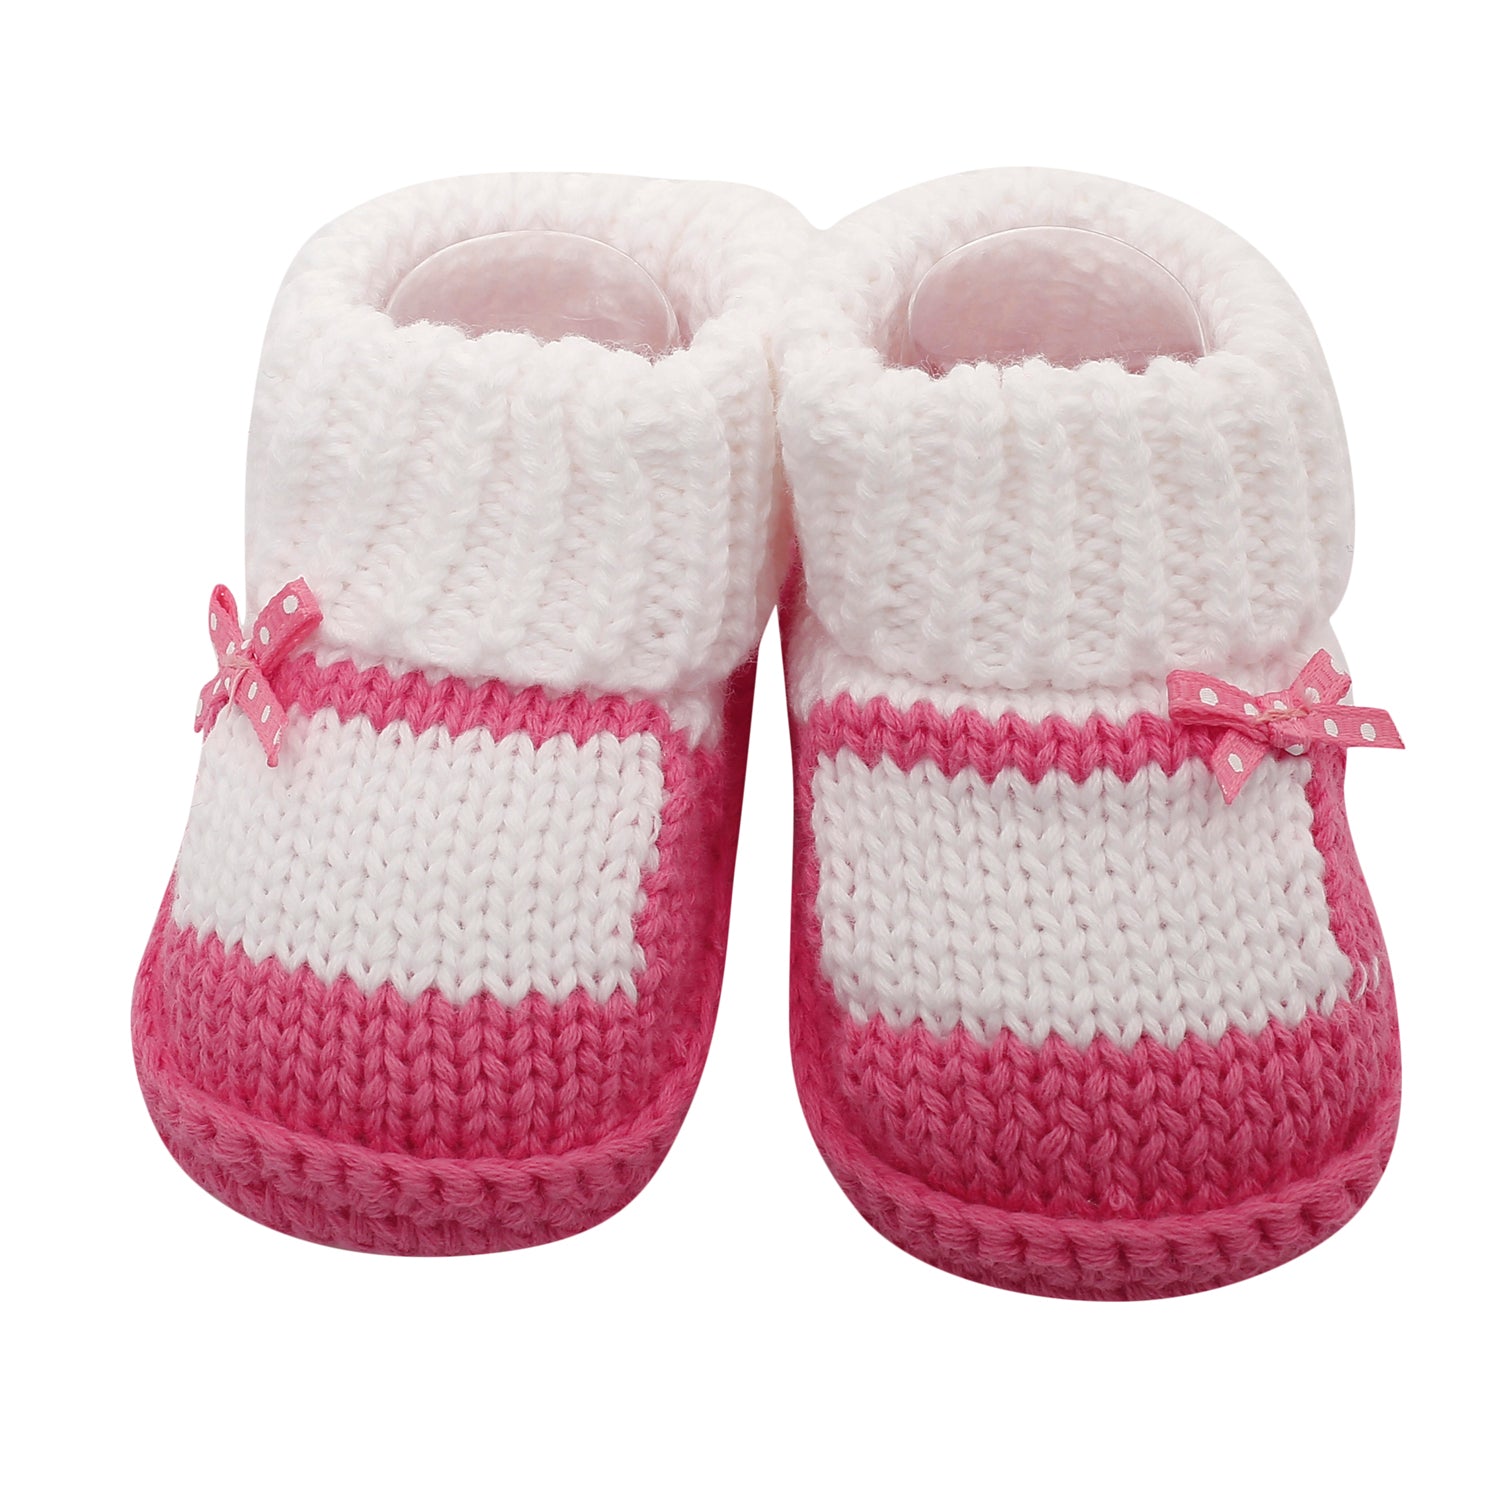 Sweet Bows White And Pink Socks Booties - Baby Moo